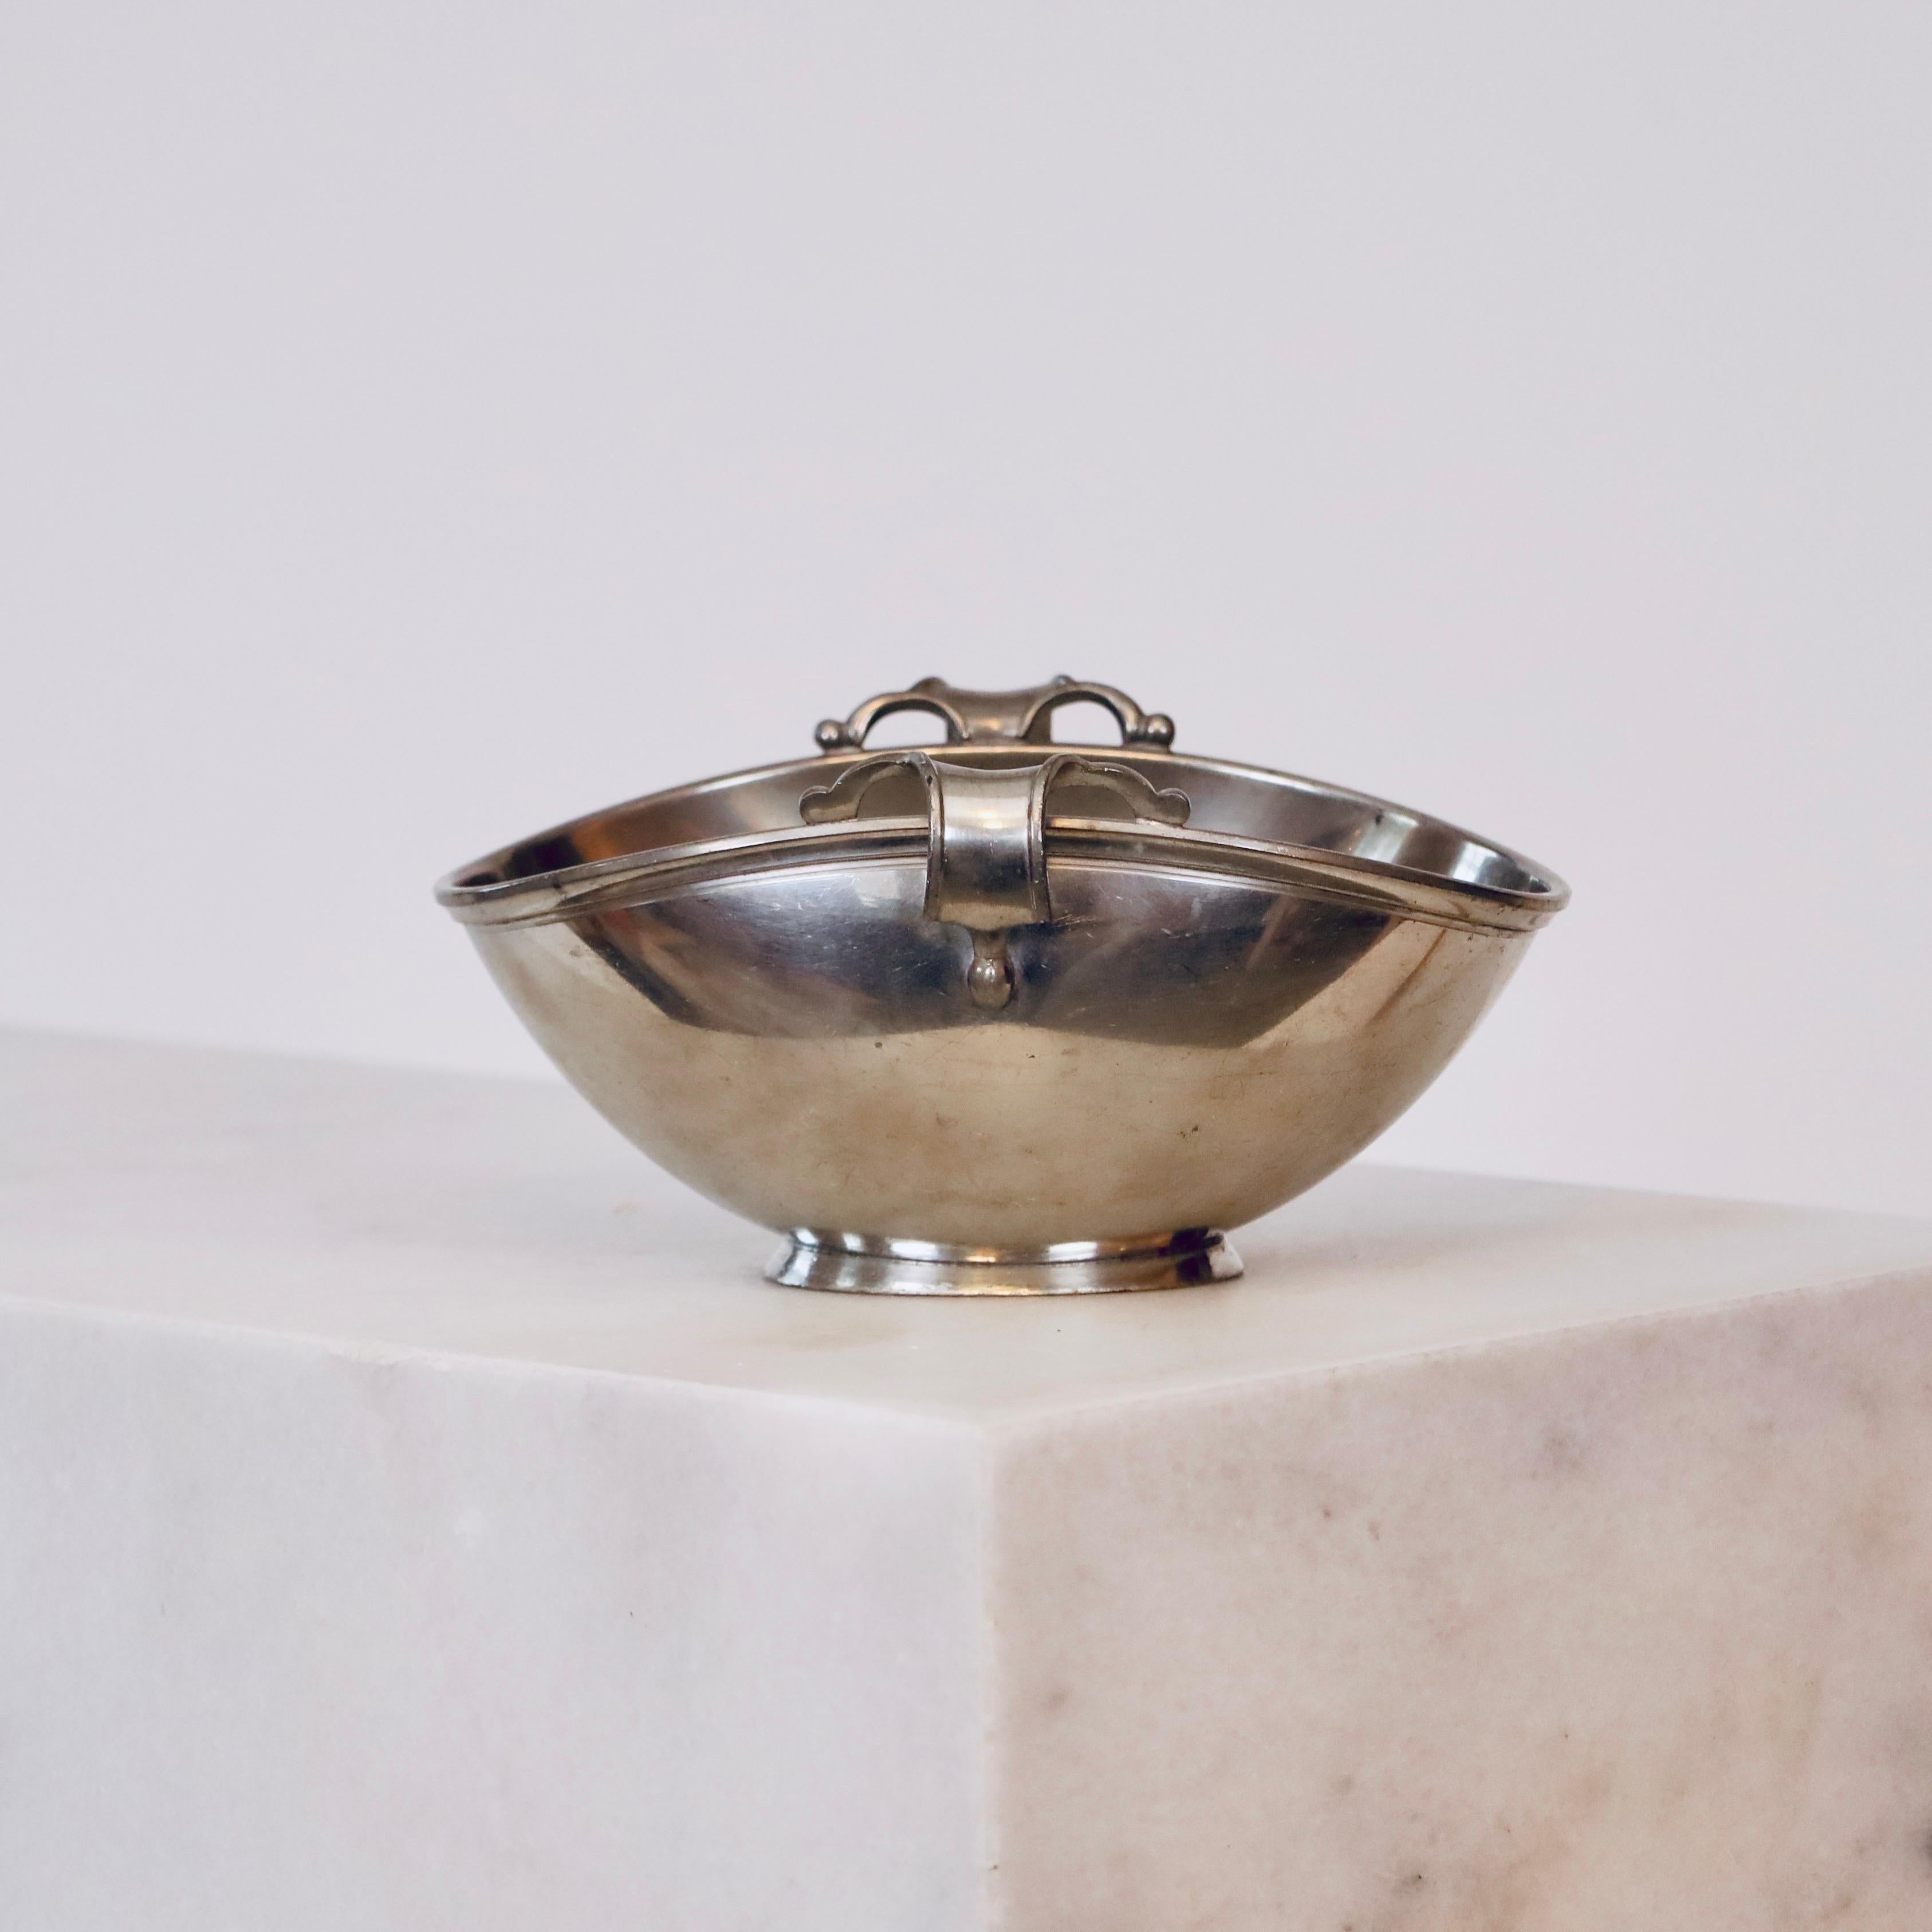 Pedestal pewter bowl with lugs made by Just Andersen in 1939. An elegant piece for a beautiful space.

* Oval bowl on foot made in pewter 
* Designer: Just Andersen
* Model: 2153
* Year: 1939
* Condition: Good vintage condition. Makers engraving